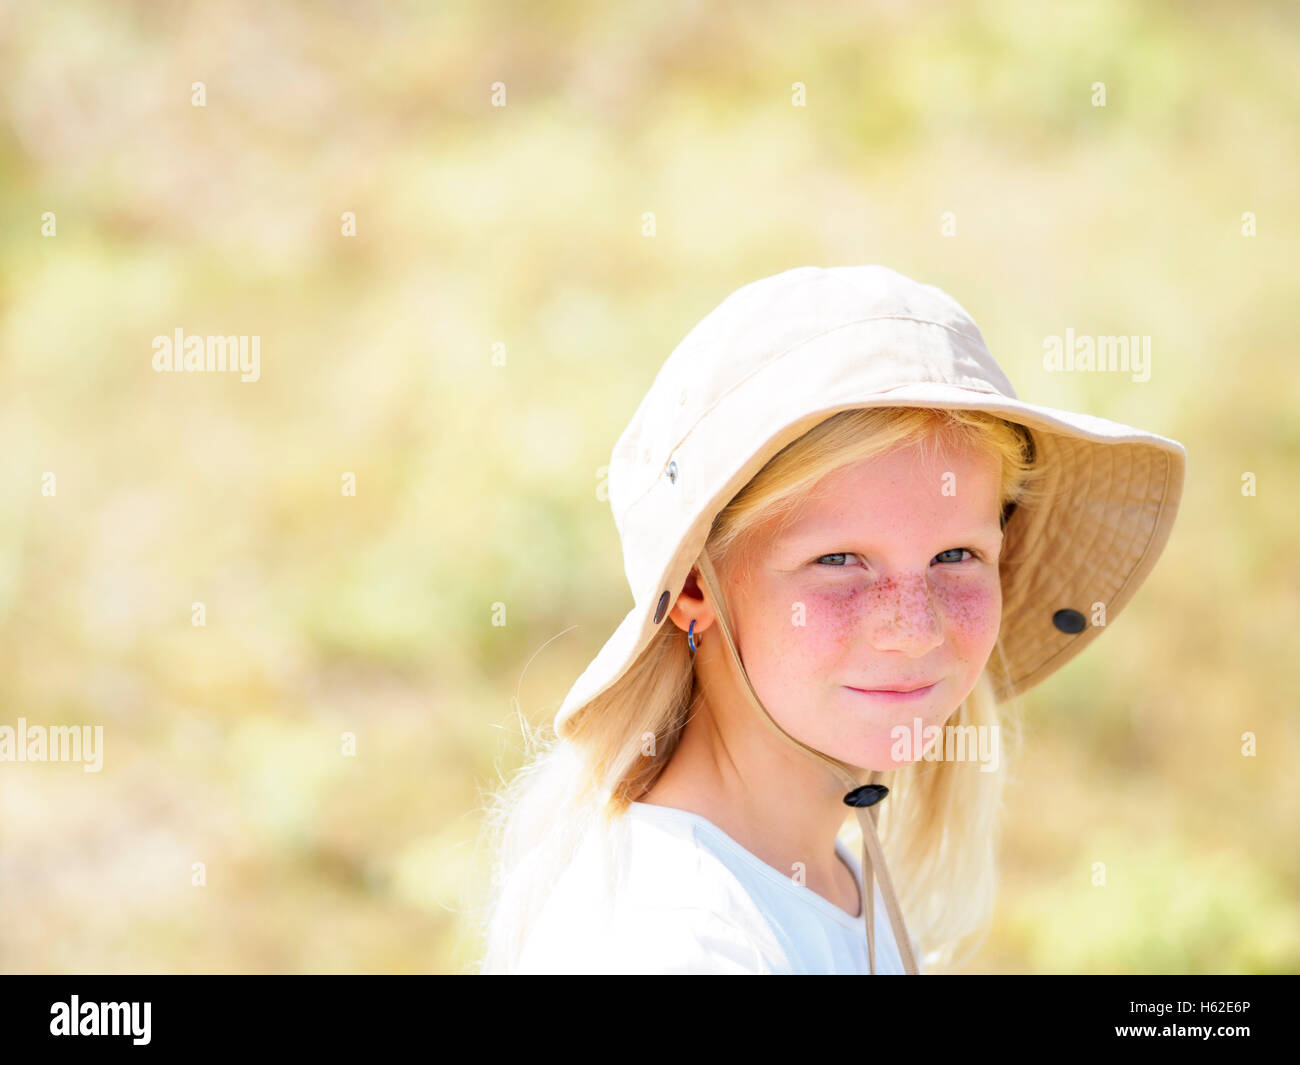 Portrait of a blond girl wearing a floppy hat Stock Photo